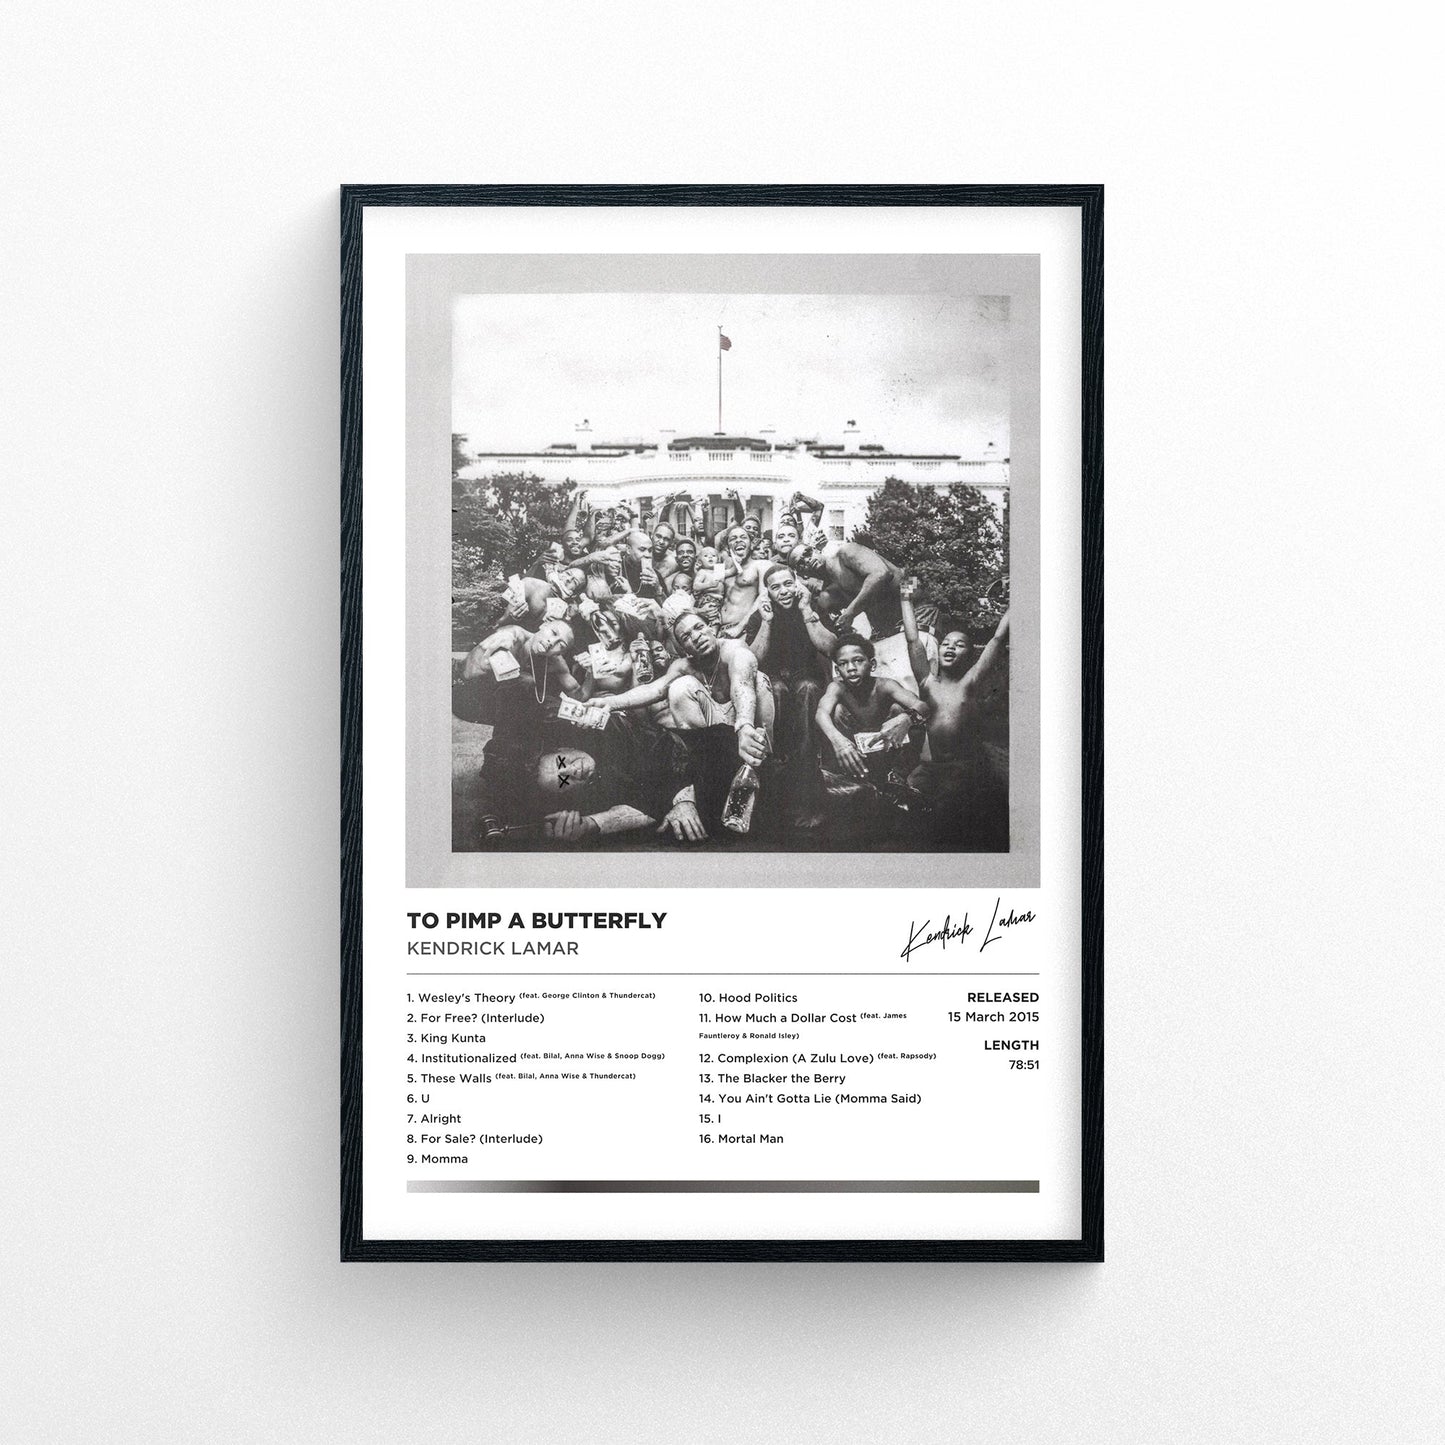 Kendrick Lamar - To Pimp A Butterfly Framed Poster Print | Polaroid Style | Album Cover Artwork